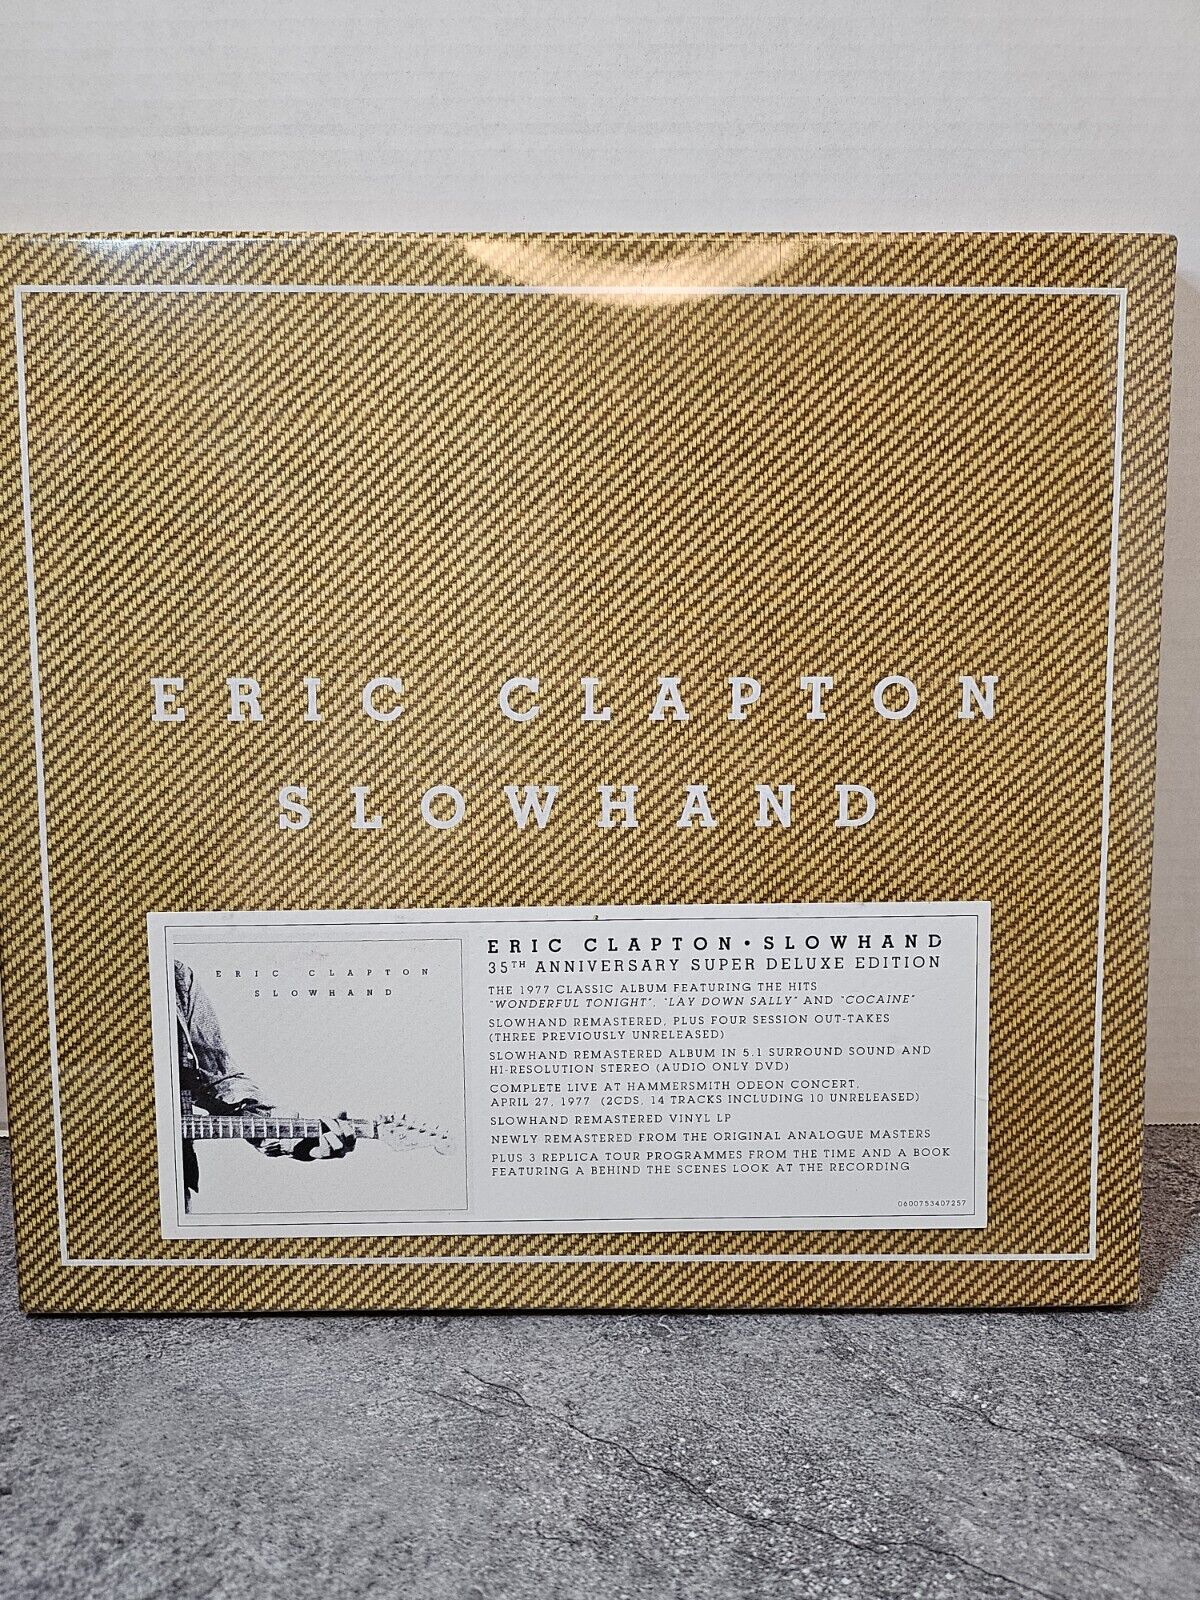 Eric Clapton slowhand 35th anniversary super deluxe edition 1 Dvd, 1 LP, 3 CD